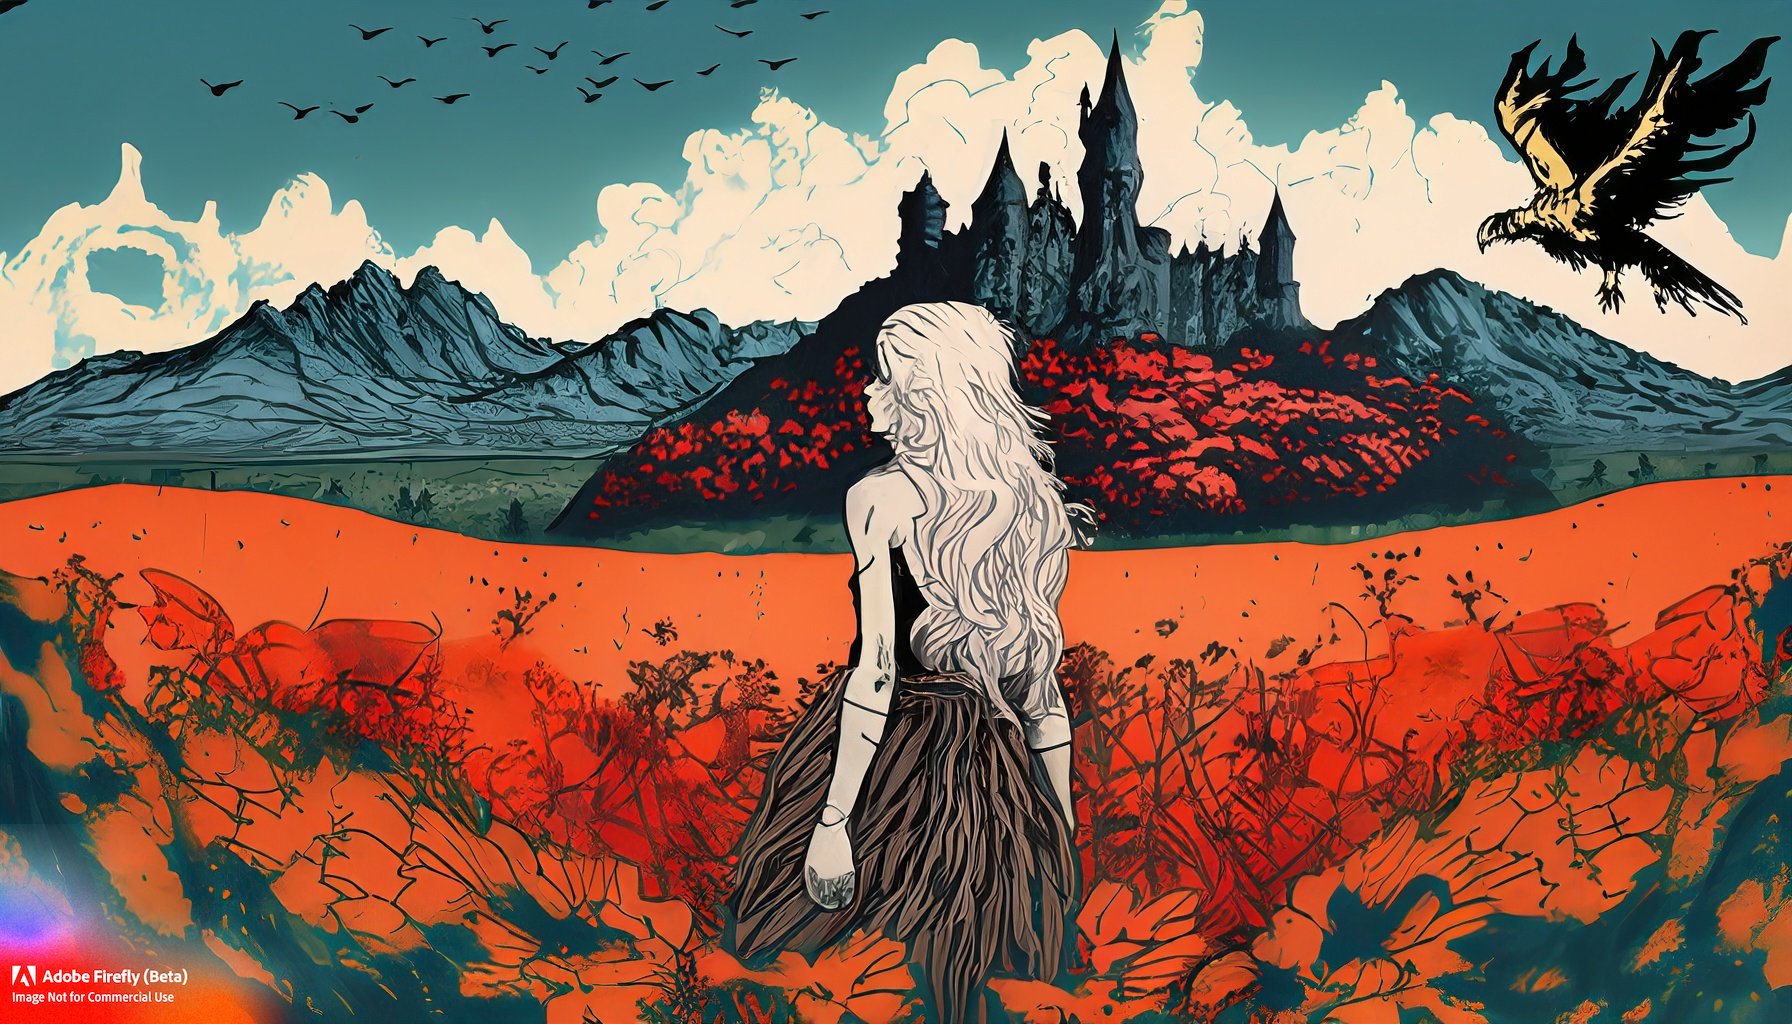 Firefly_a+line etching of a blonde fae facing away from the camera, standing in a meadow of red and orange flowers, with a mountain range and a castle in the background, a hawk flying_art,wide_angle_8626.jpg